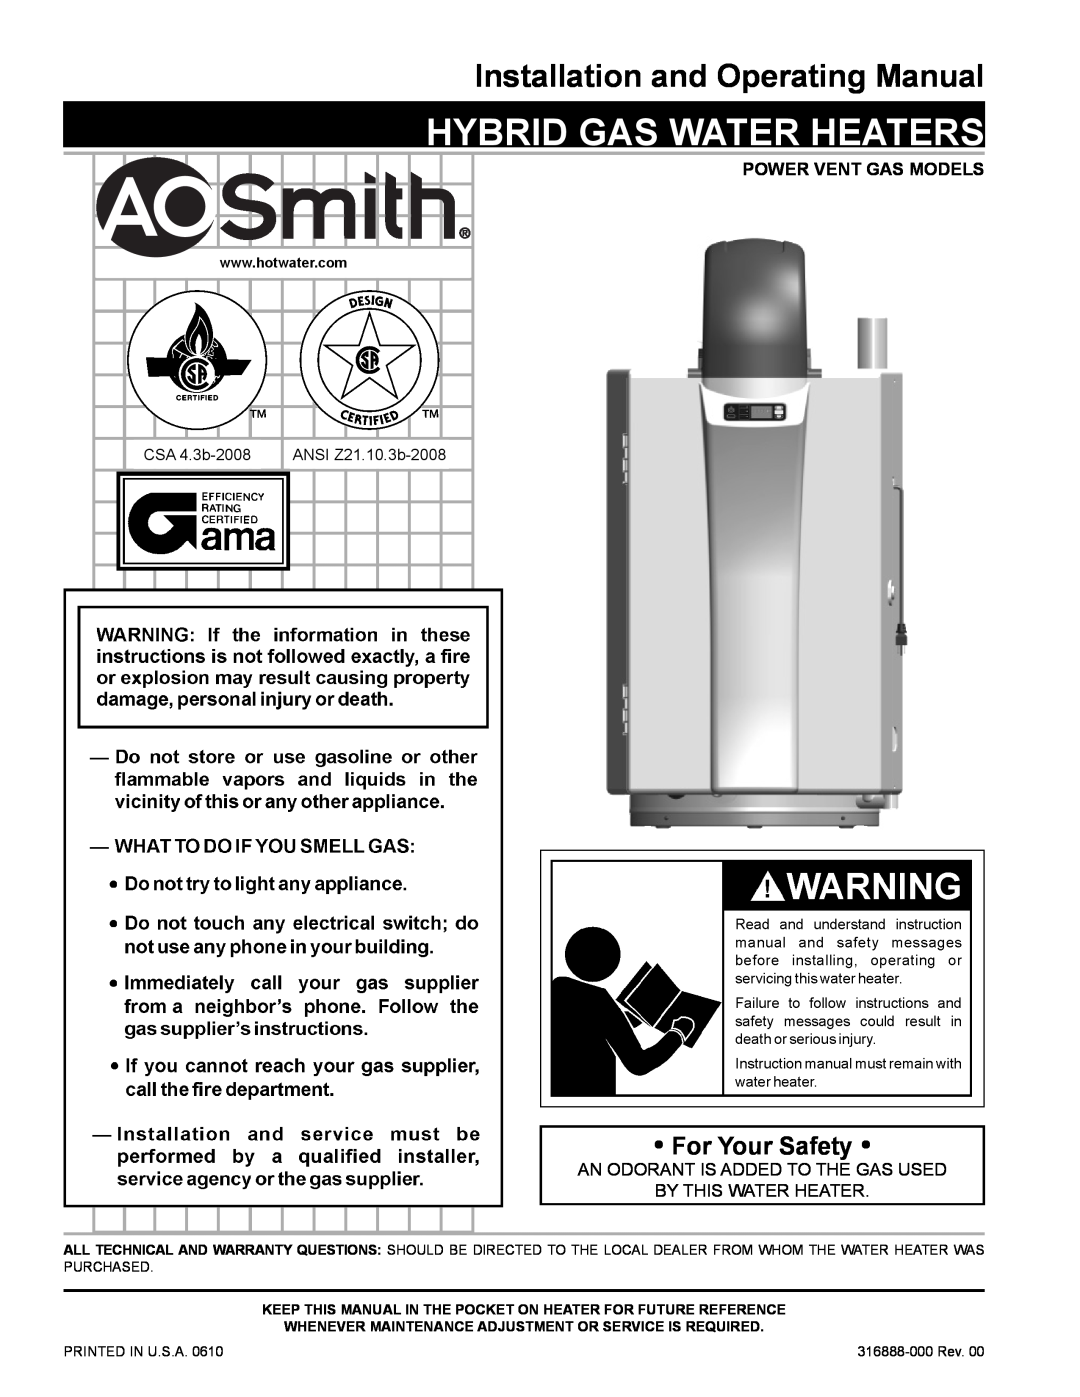 A.O. Smith HYB-90N warranty For Your Safety, Power Vent Gas Models, Hybrid Gas Water Heaters 